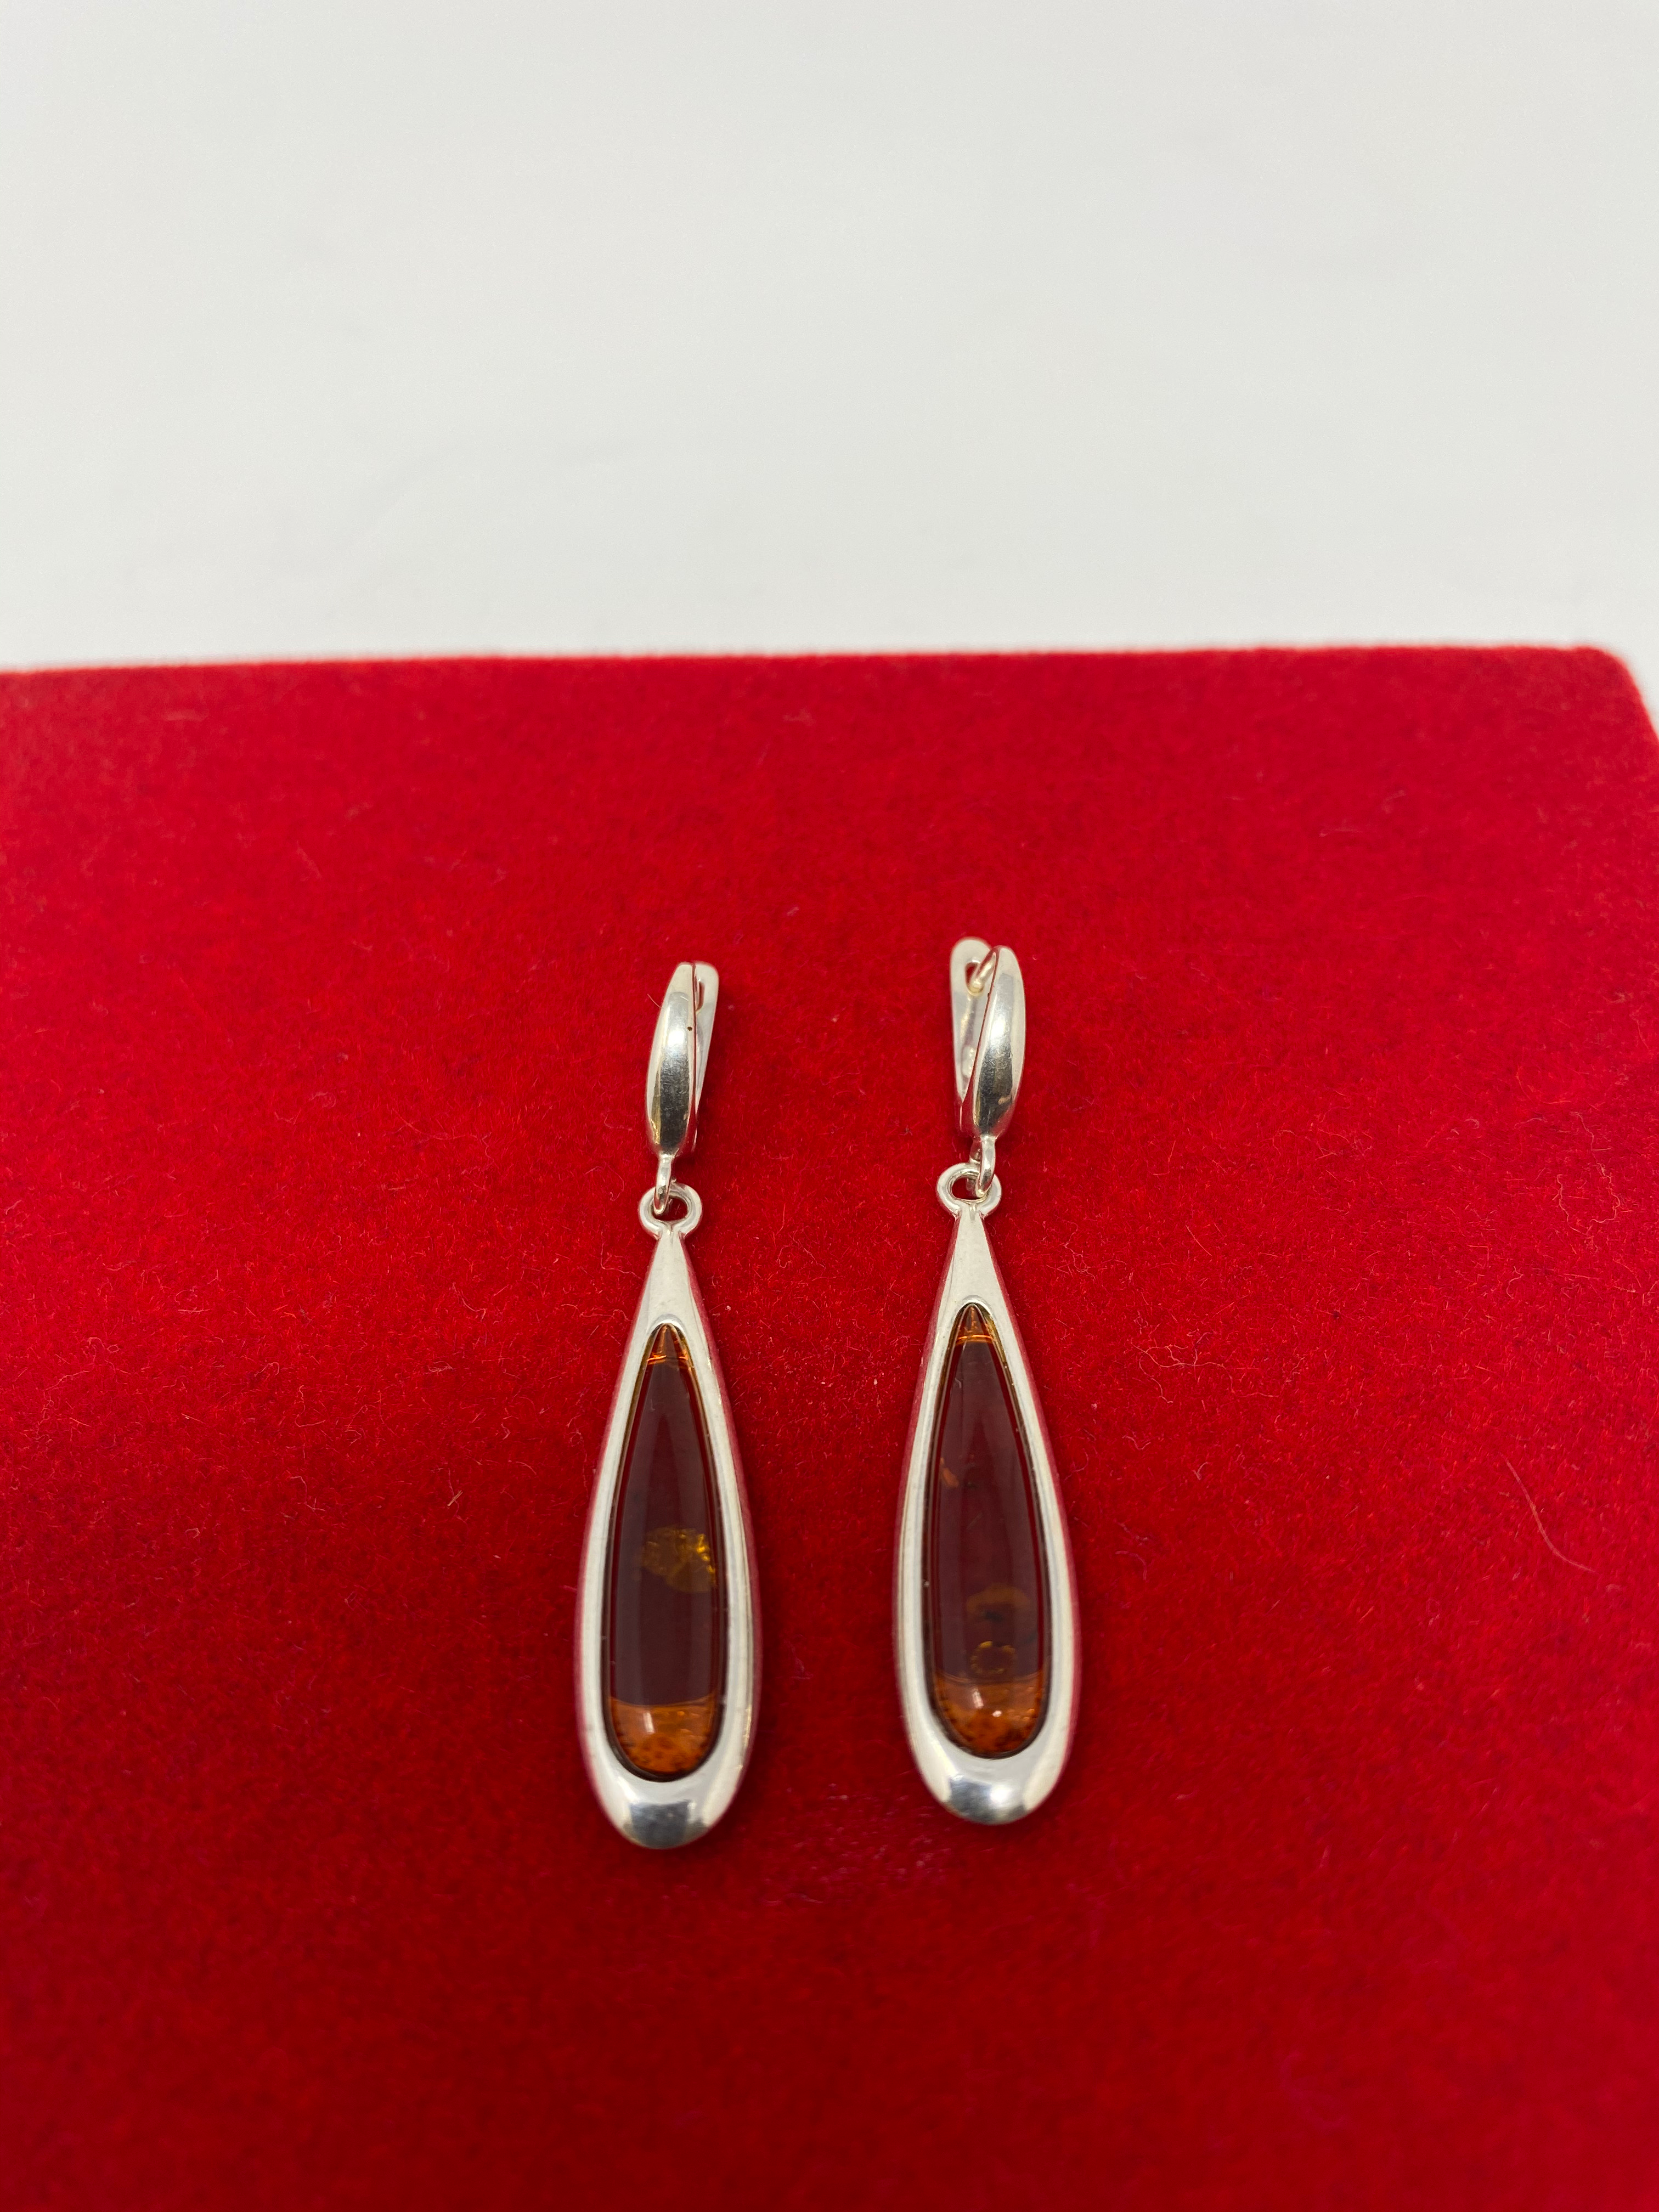 Silver and Amber Drop Earrings